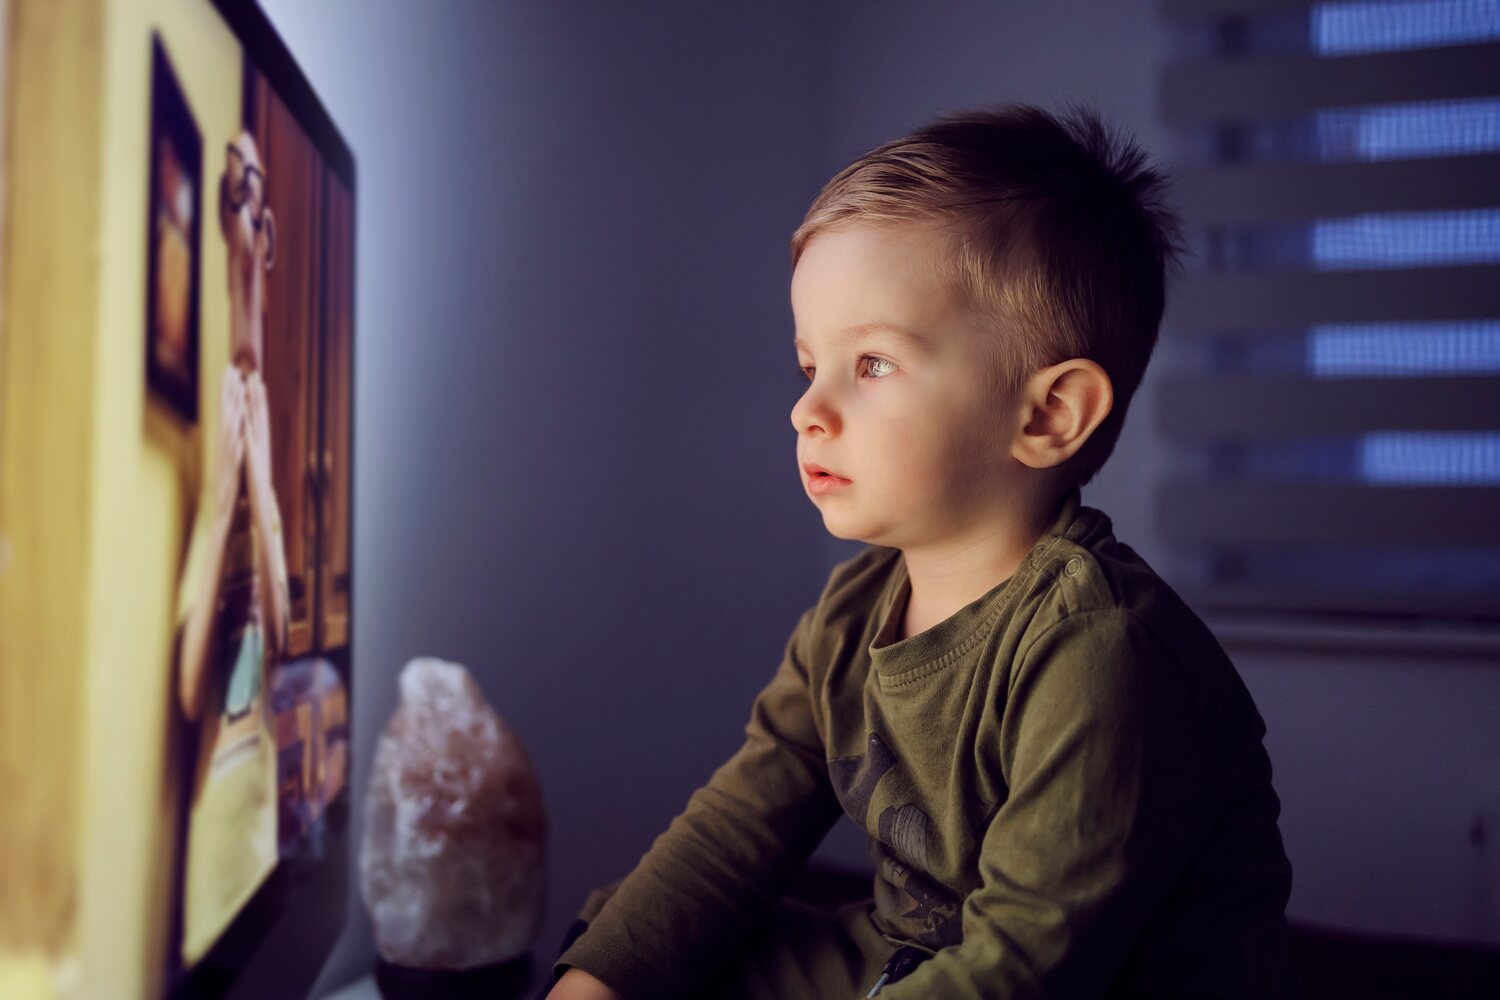 Is your toddler a TV addict